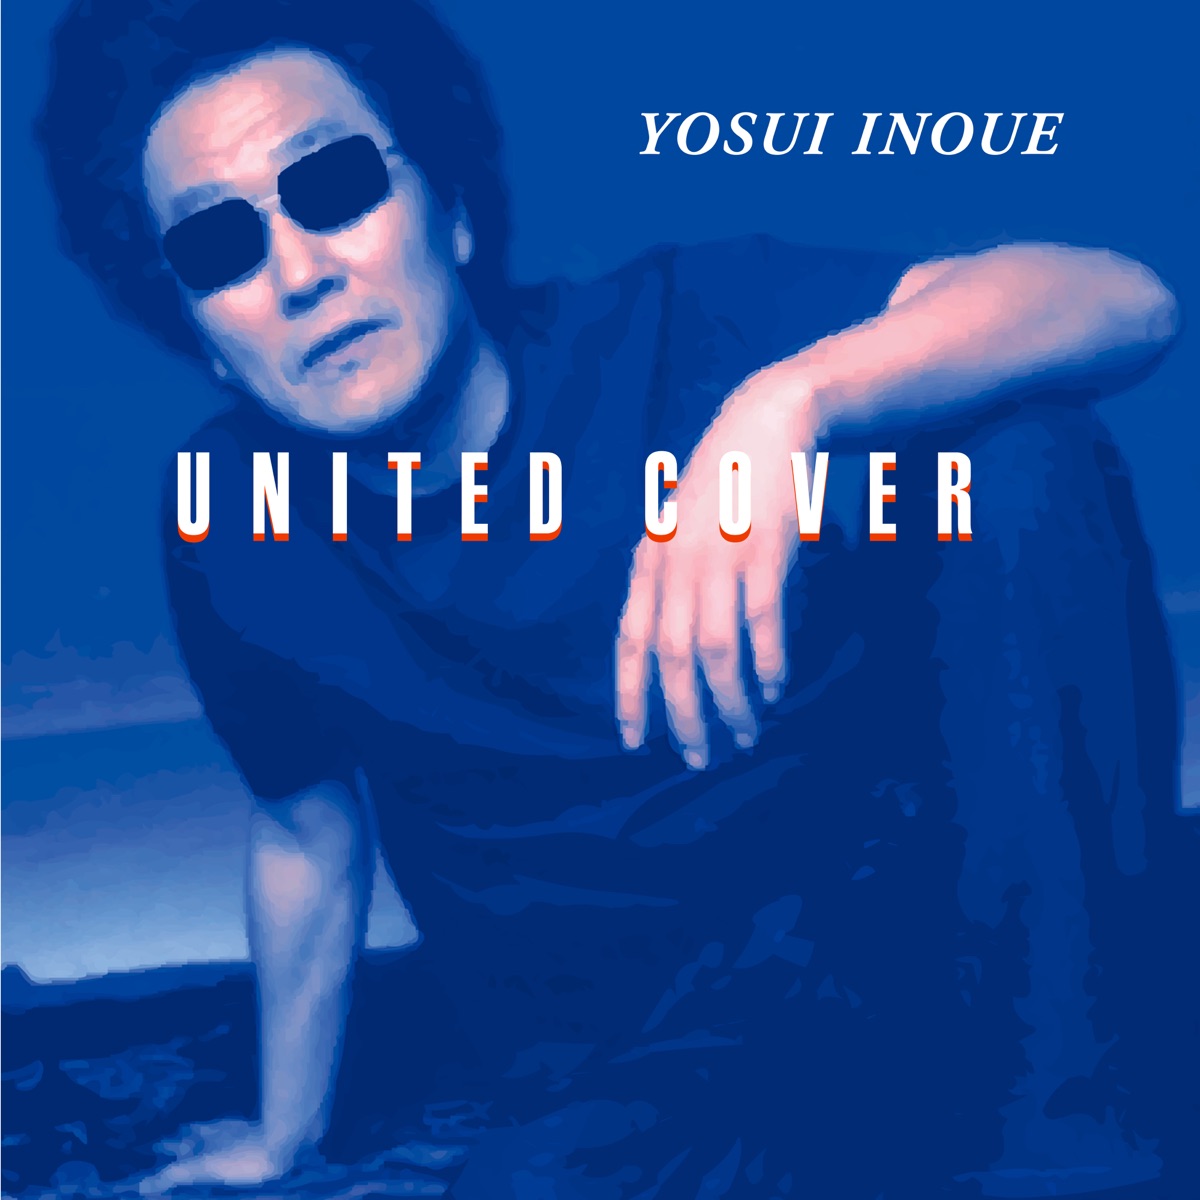 UNITED COVER (Remastered 2018) by 井上陽水 on Apple Music